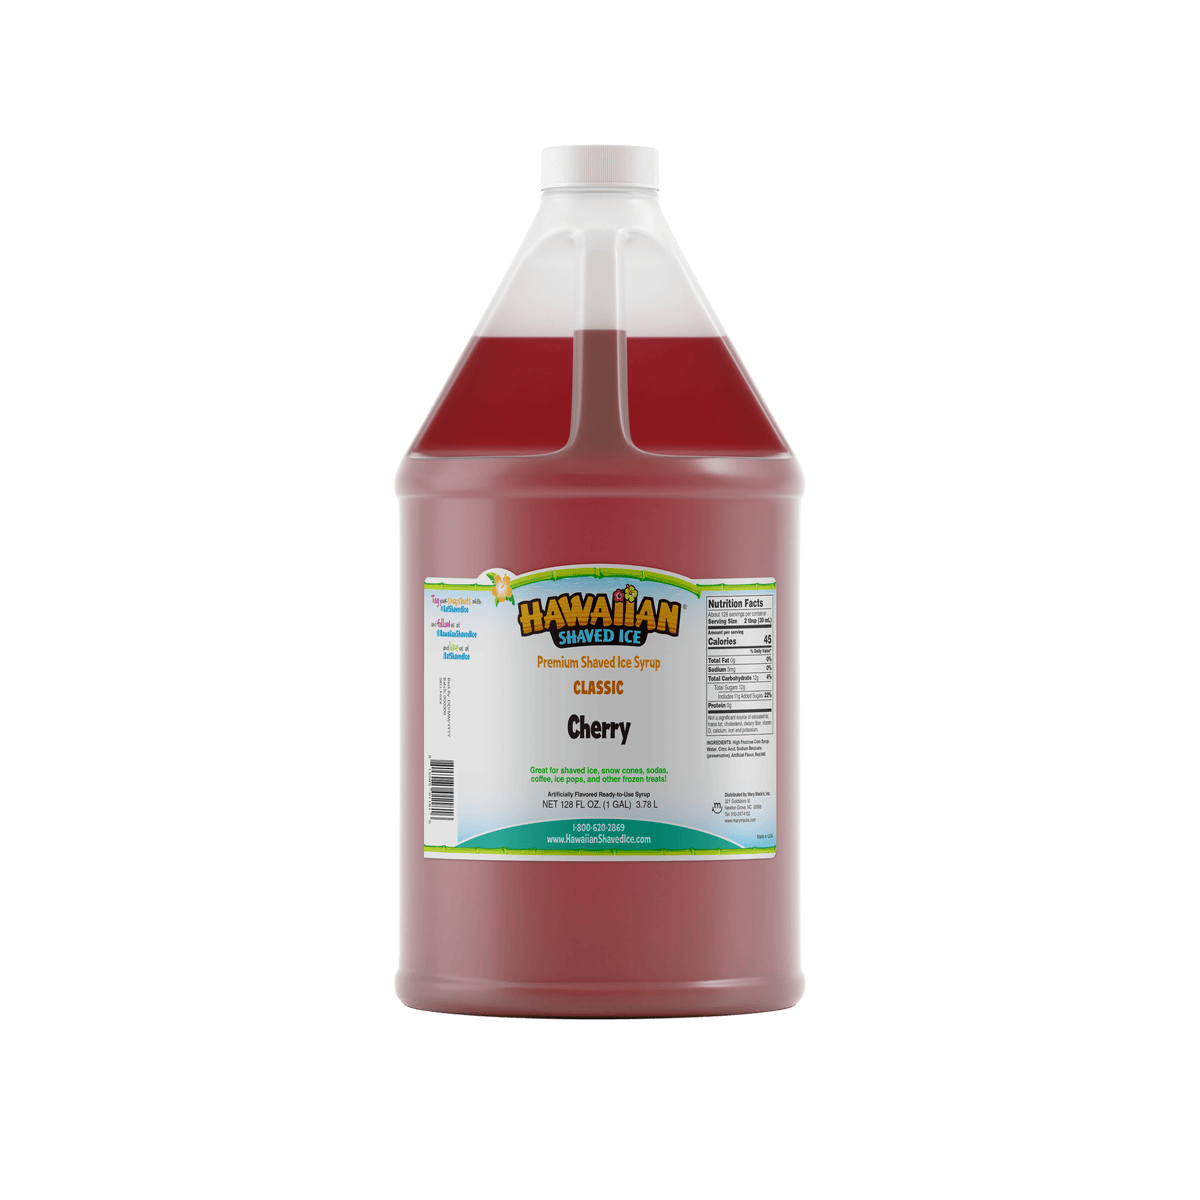 A gallon (128-oz) of Hawaiian Shaved Ice Cherry Flavored syrup, Red